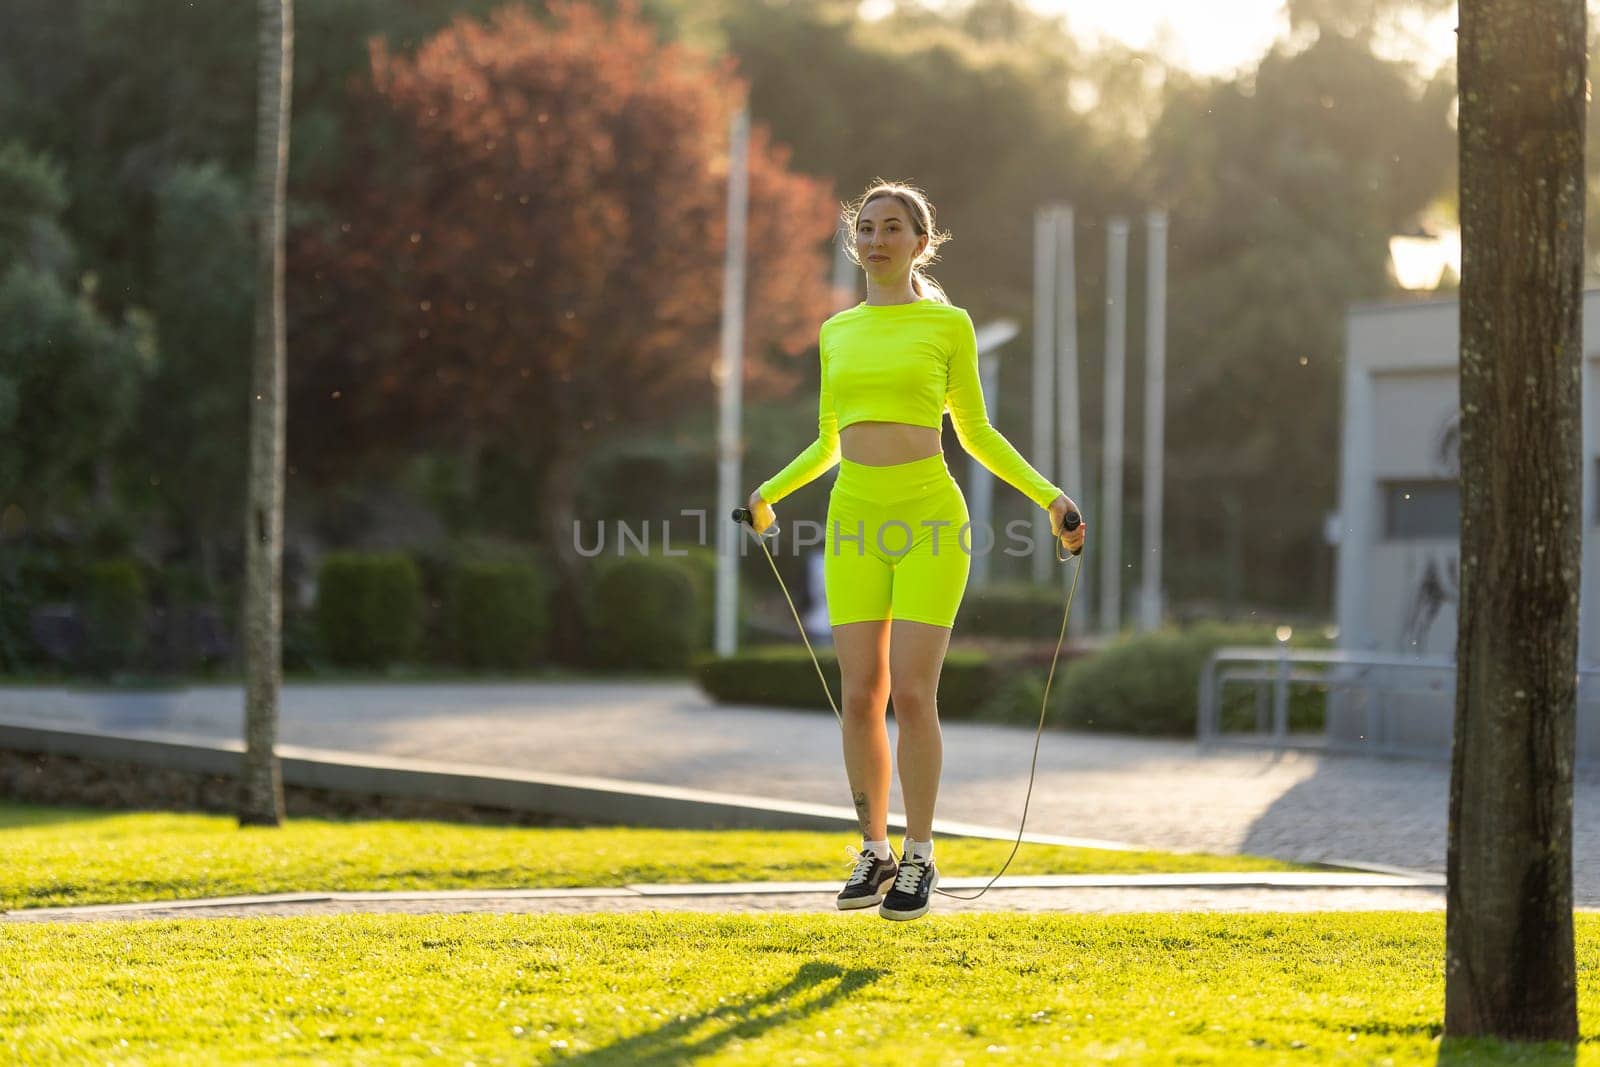 A woman in a neon yellow outfit is jumping rope in a park. The scene is bright and cheerful, with the woman's outfit and the green grass creating a sense of energy and positivity